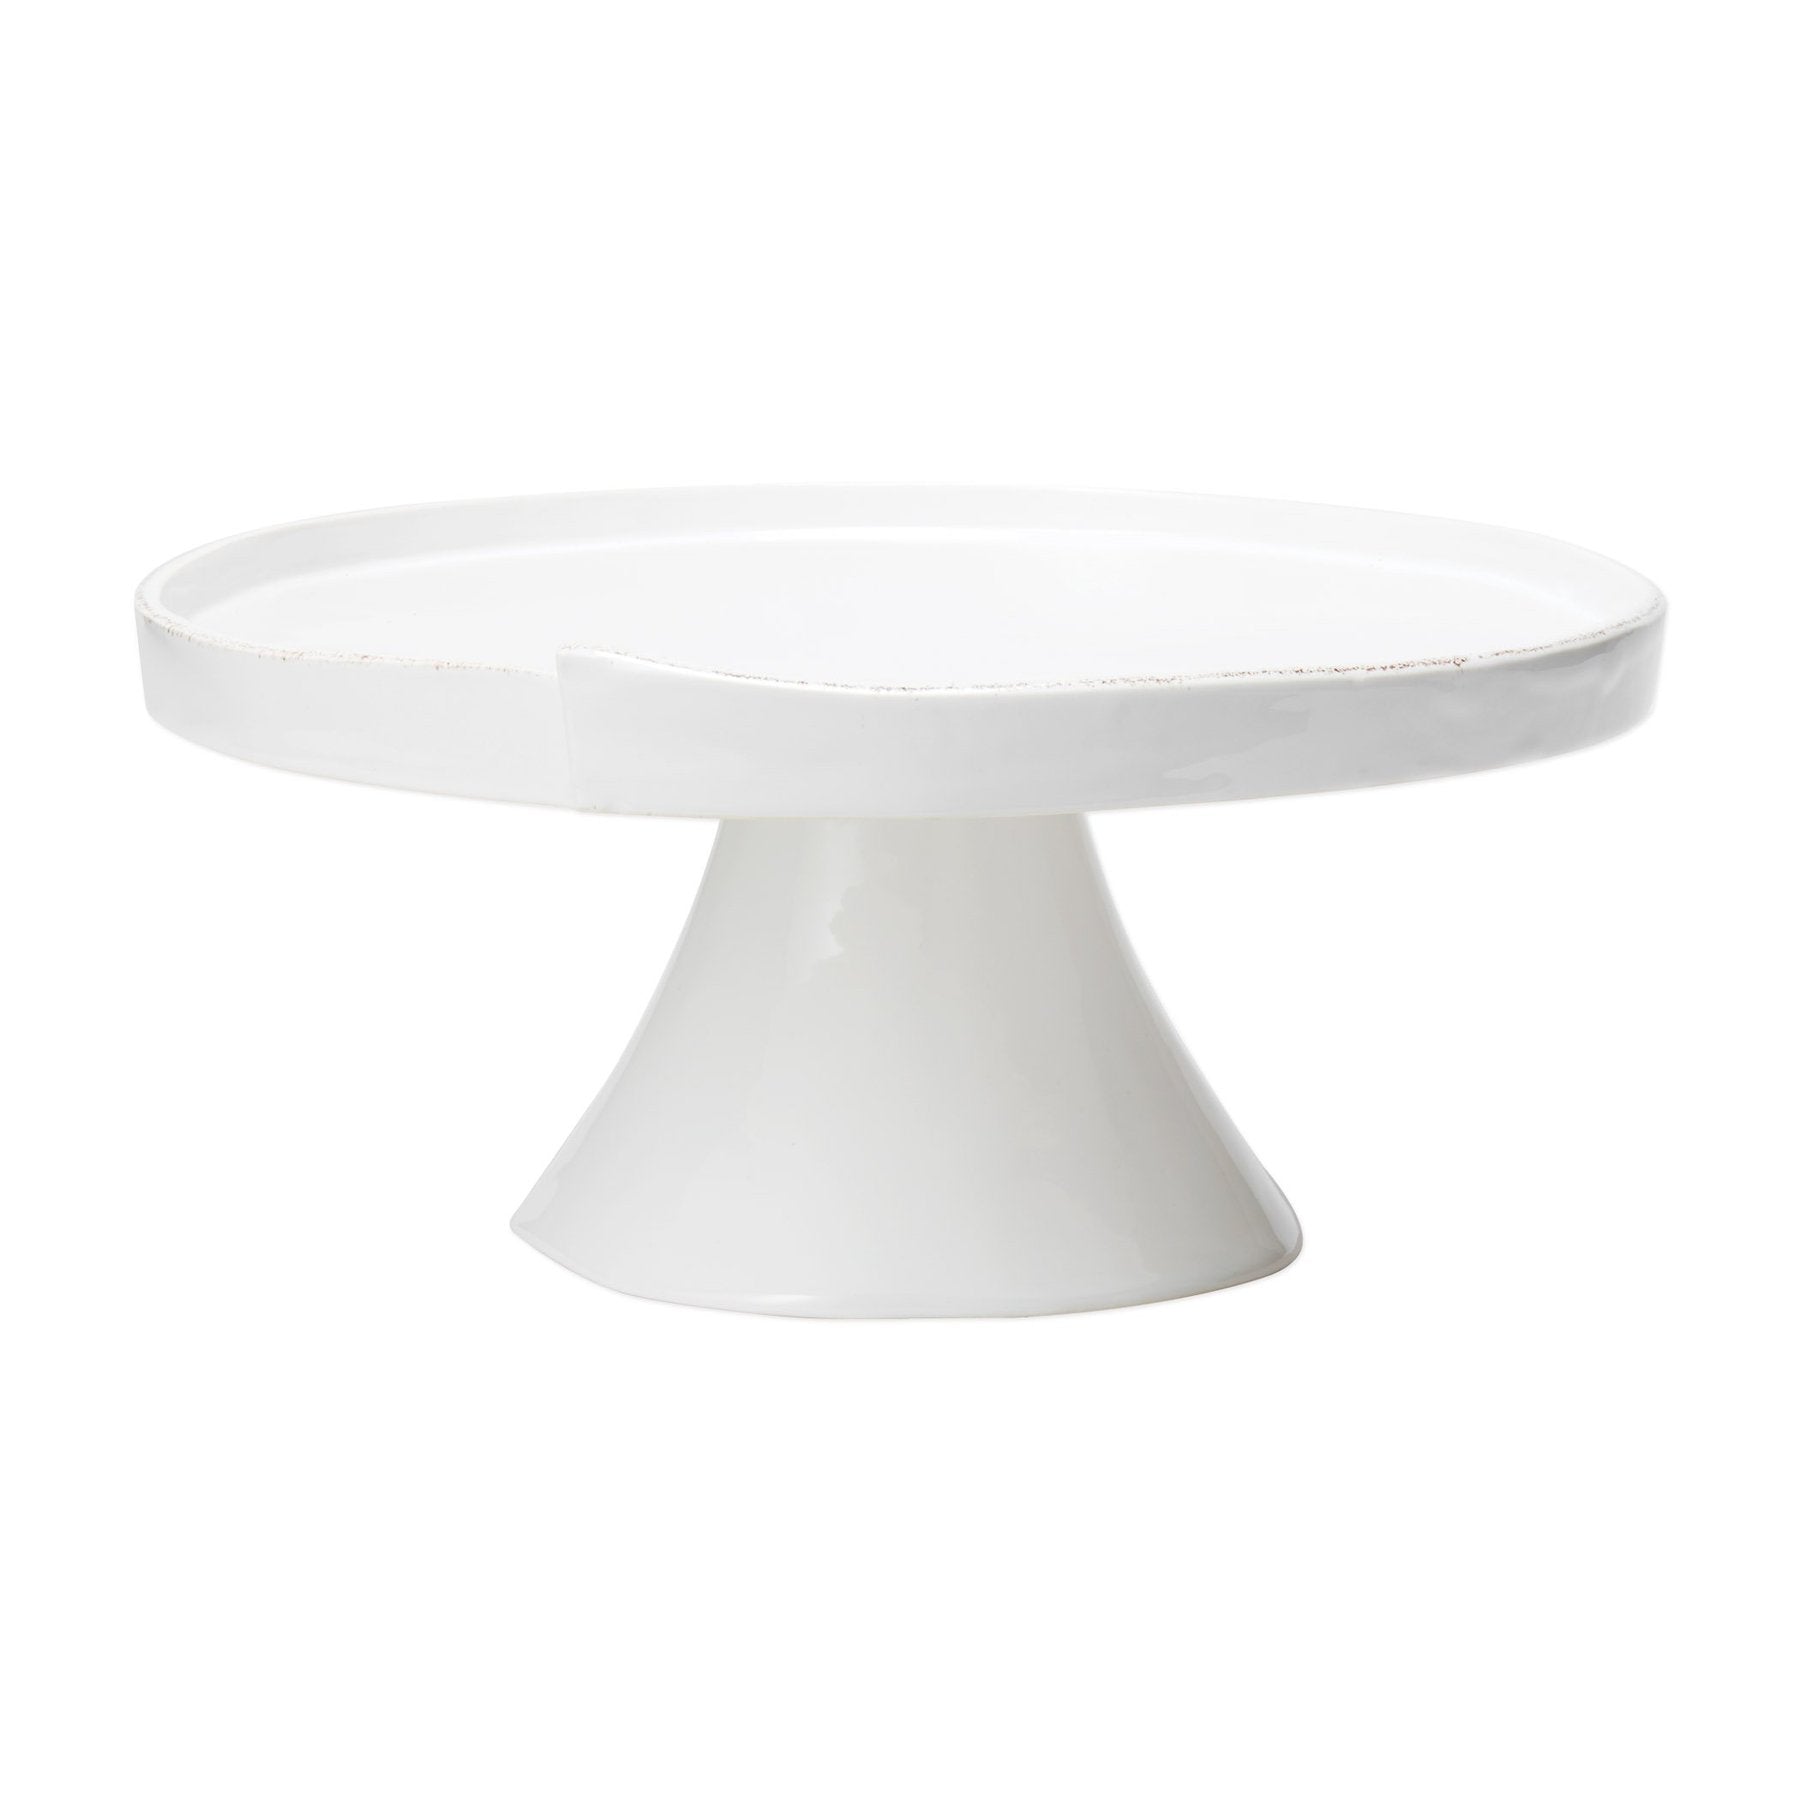 white cake stand with fluted pedestal and rimmed edge on white background.